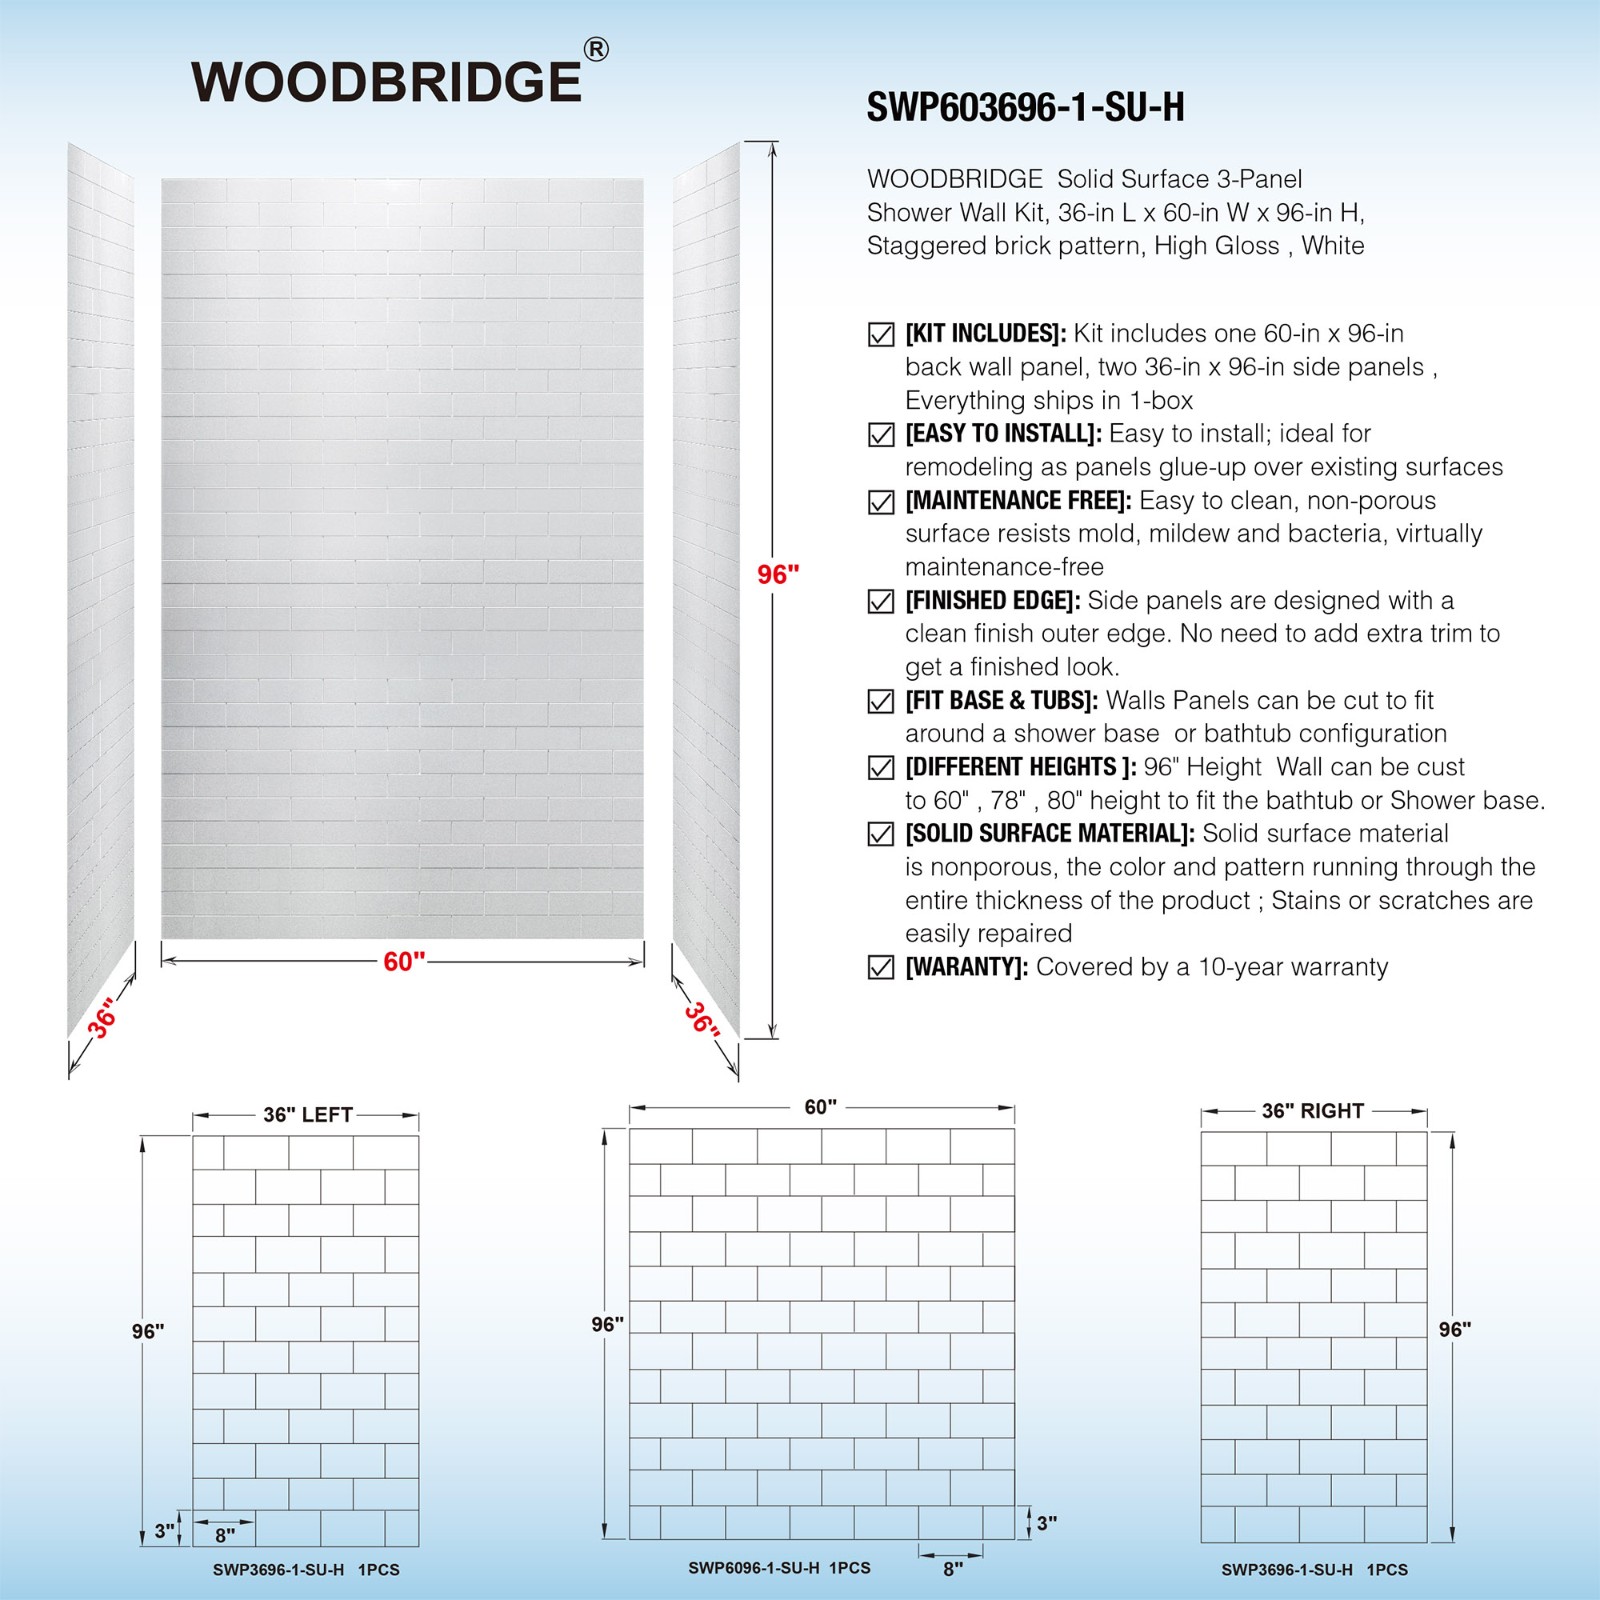  WOODBRIDGE SWP603696-1-SU-H Solid Surface 3-Panel Shower Wall Kit, 36-in L x 60-in W x 96-in H, Staggered Brick Pattern, High Gloss, White_8477